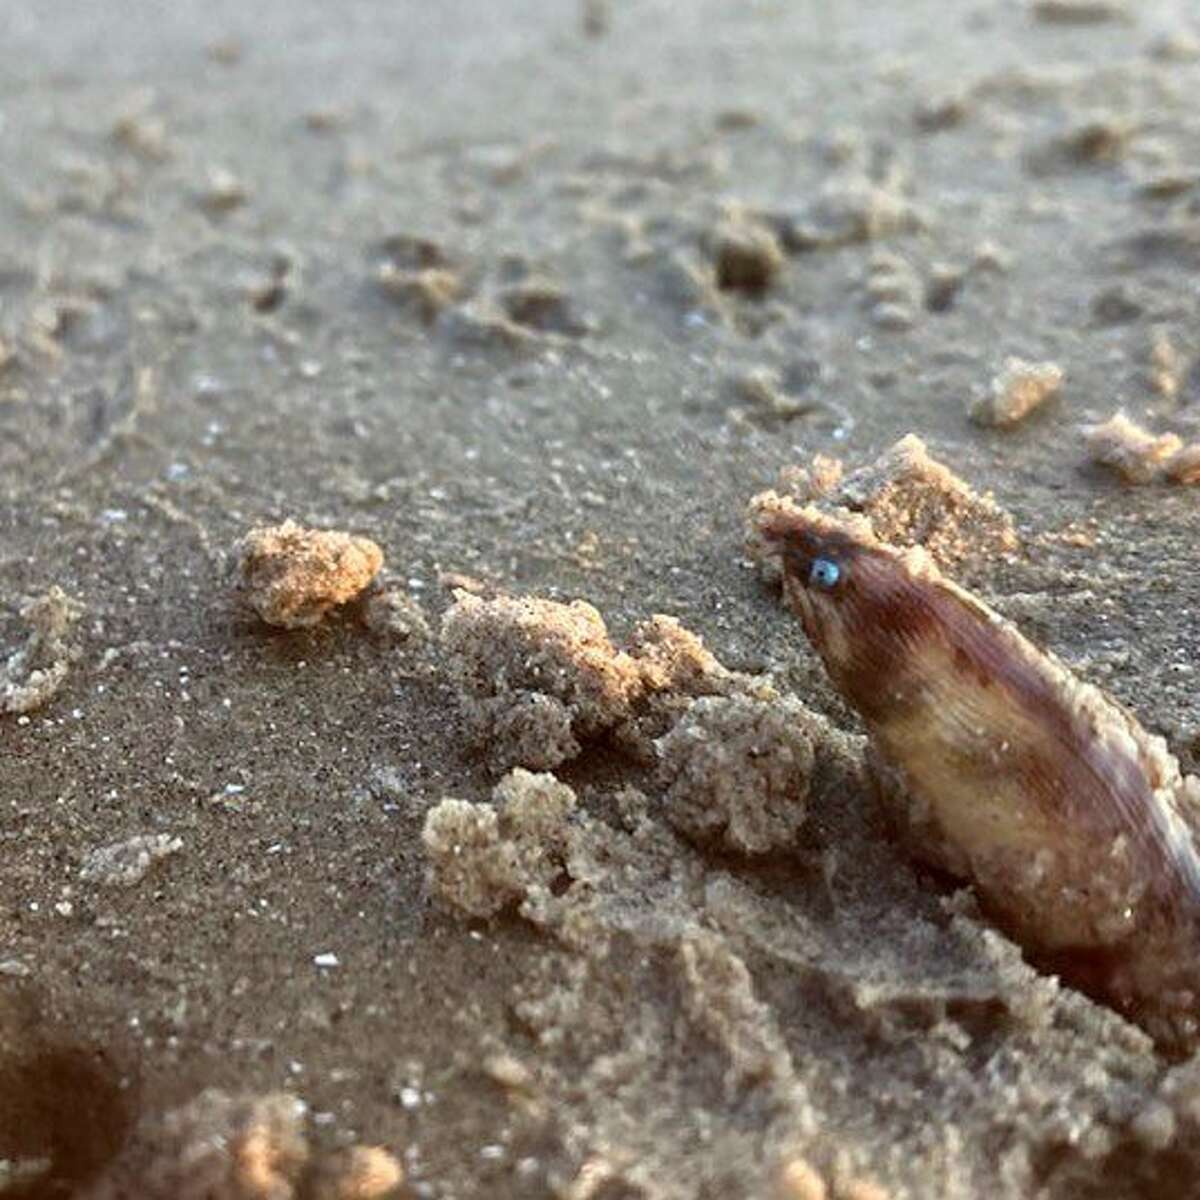 On August 18, officials with the Texas Parks and Wildlife Department shared a photo on Facebook of a shrimp eel a Galveston beachgoer saw while along the shore.   